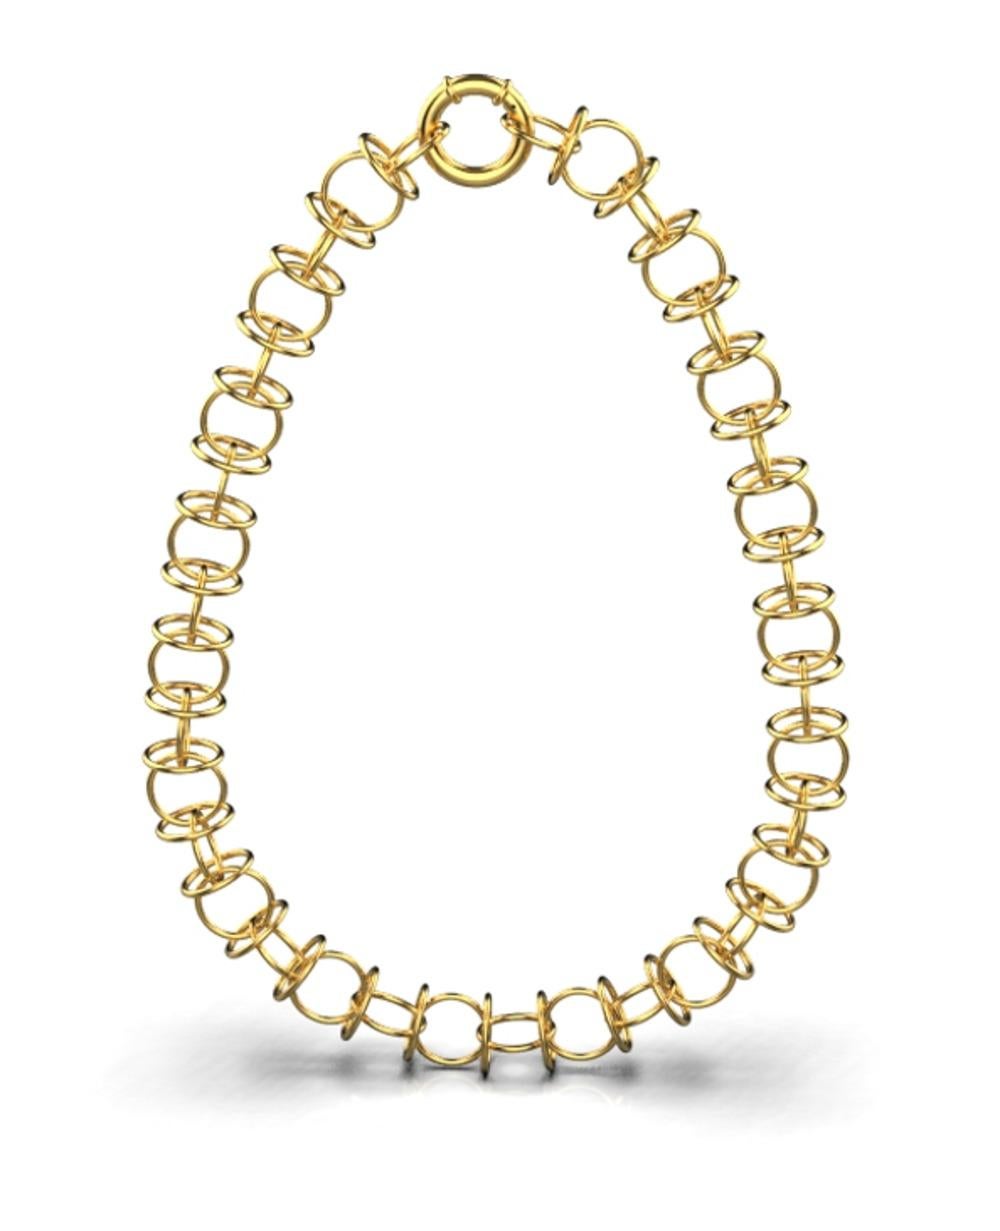 Product Details:

Loop Chain Necklace is hand crafted to perfection with precious metallic circular loops joined together to create a beautiful statement piece. Officially Hallmarked at the Assay Office, UK. This item is